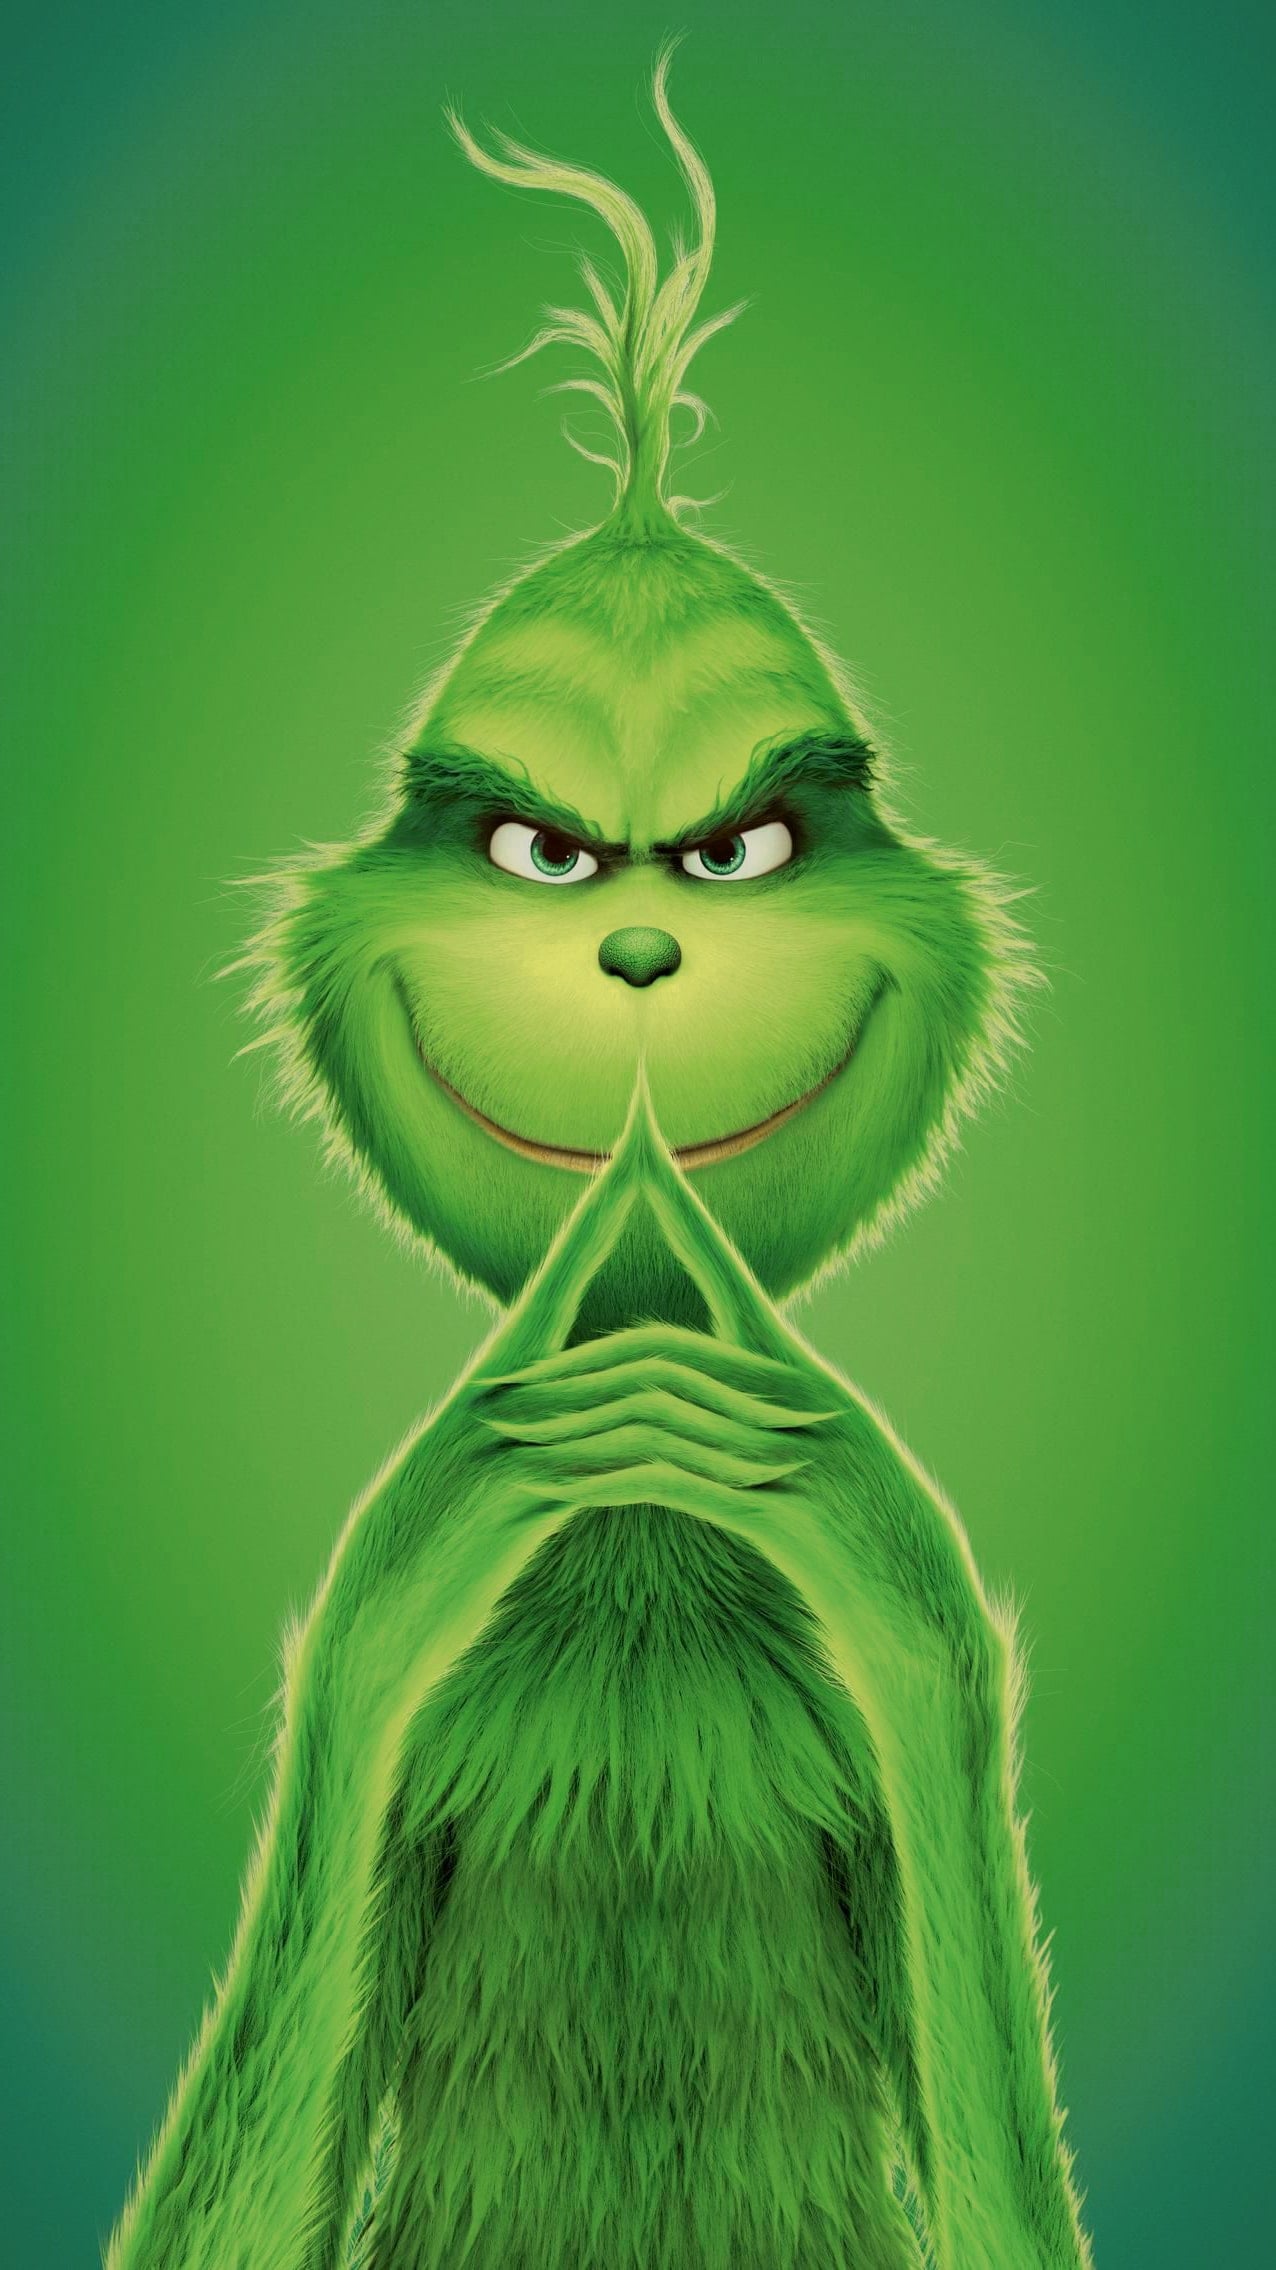 The Grinch Wallpaper - NawPic